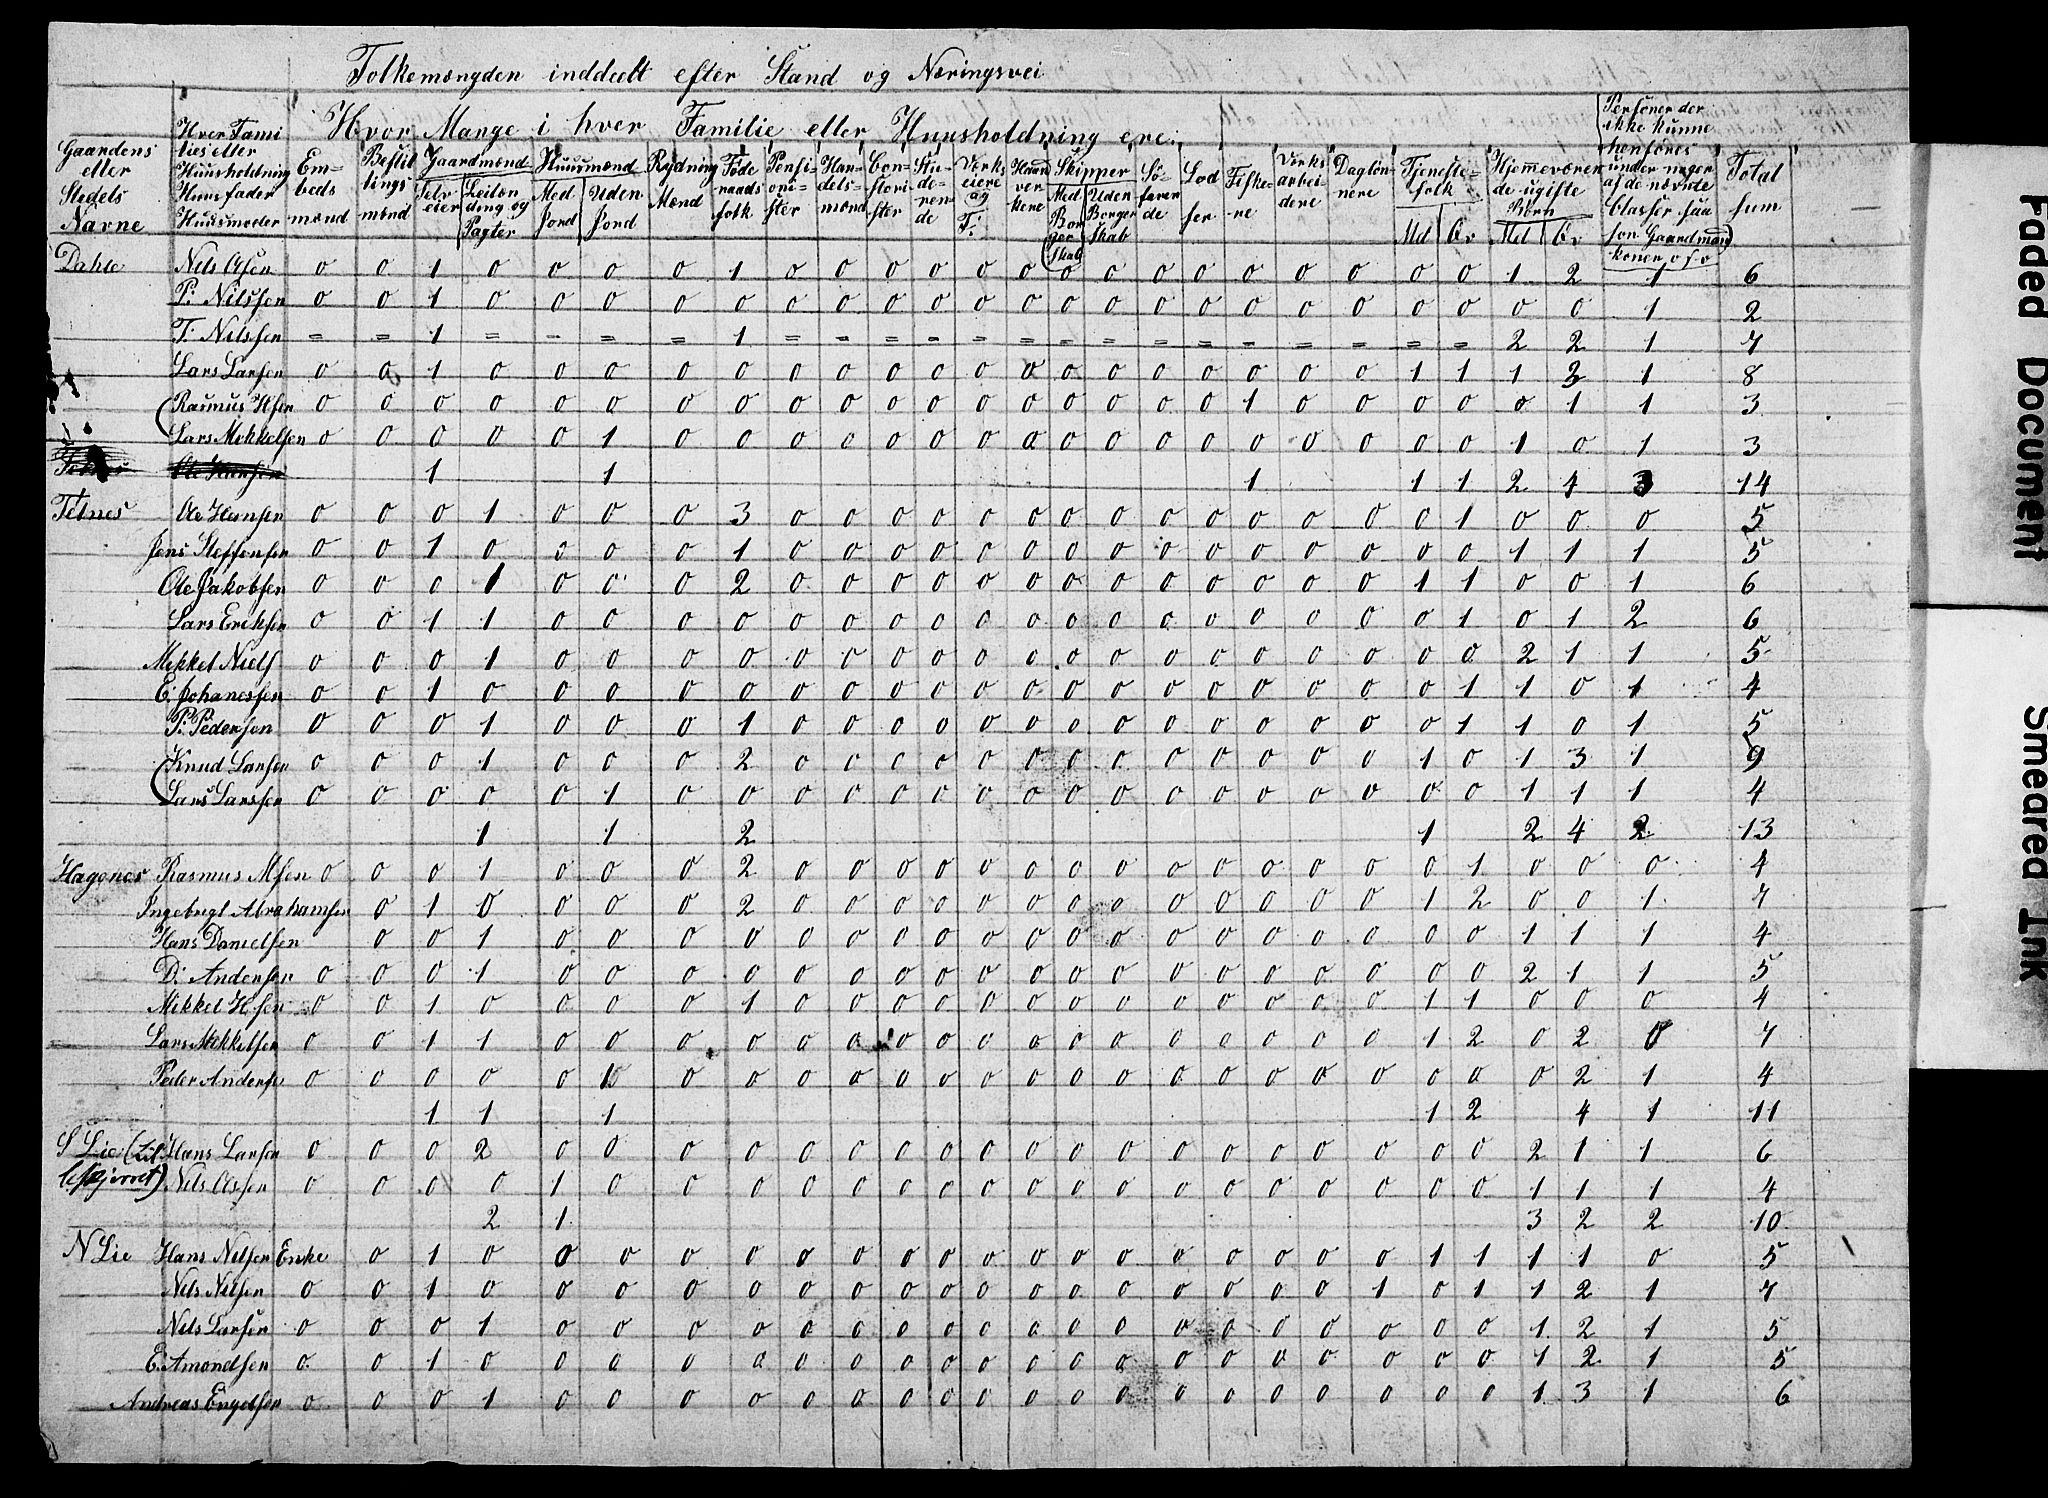 , Census 1845 for Fjell/Fjell, 1845, p. 4